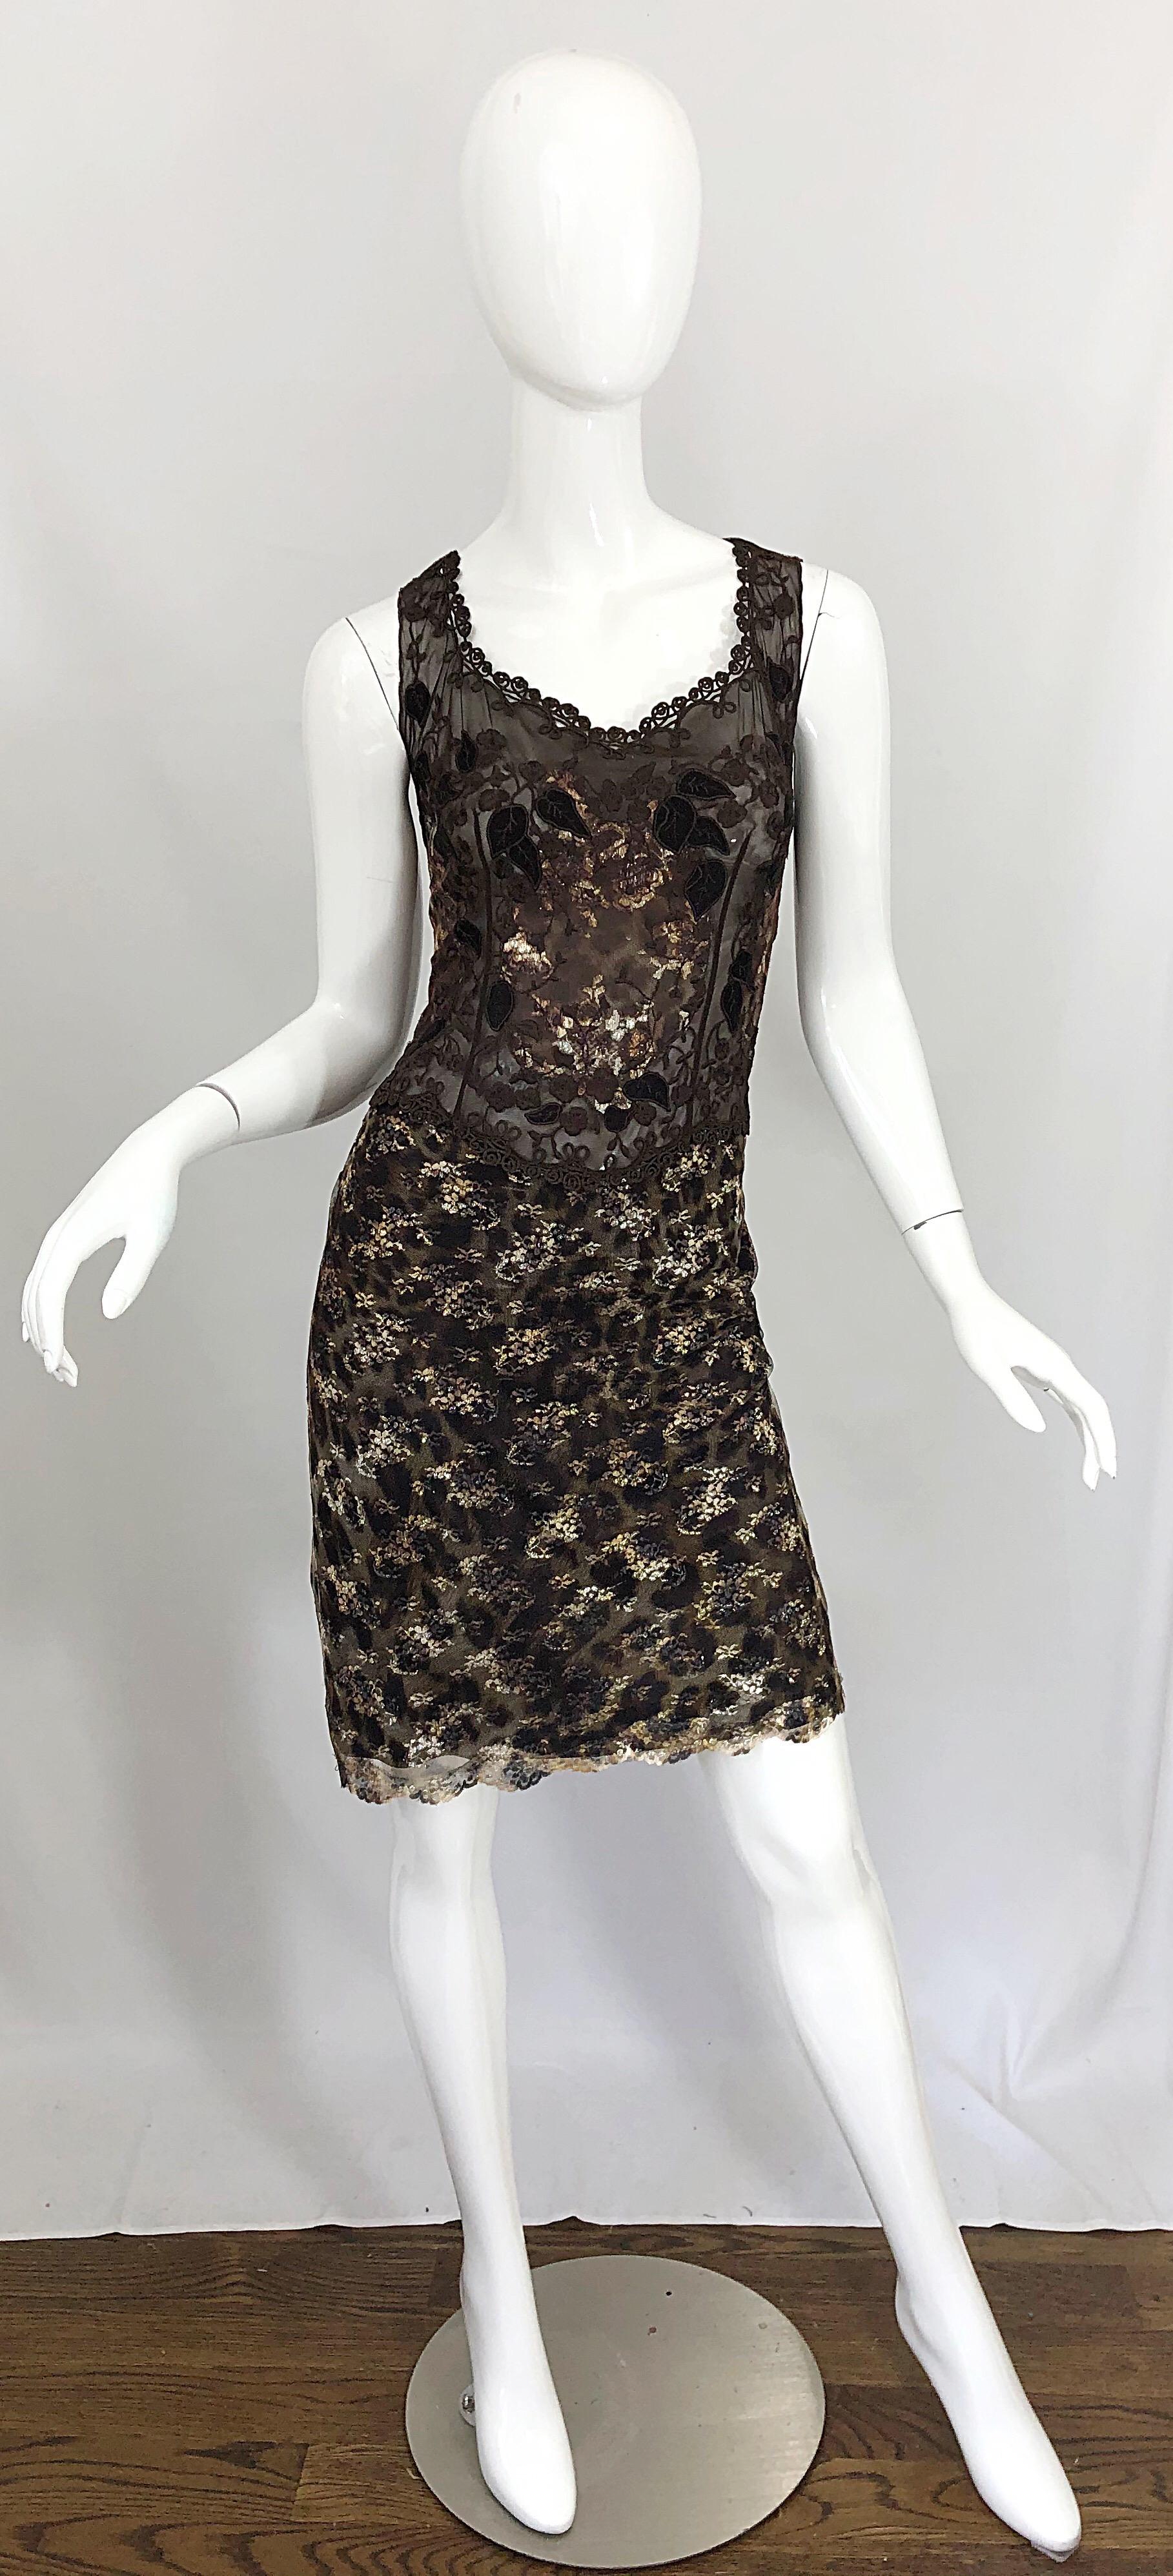 Sexy late 90s GAI MATTIOLO vintage semi sheer leopard print brown semi sheer sleeveless dress! Features intricate embroidery on the bodice, which covers the breasts. Gold, silver and bronze metallic embroidery throughout the entire dress. Hidden